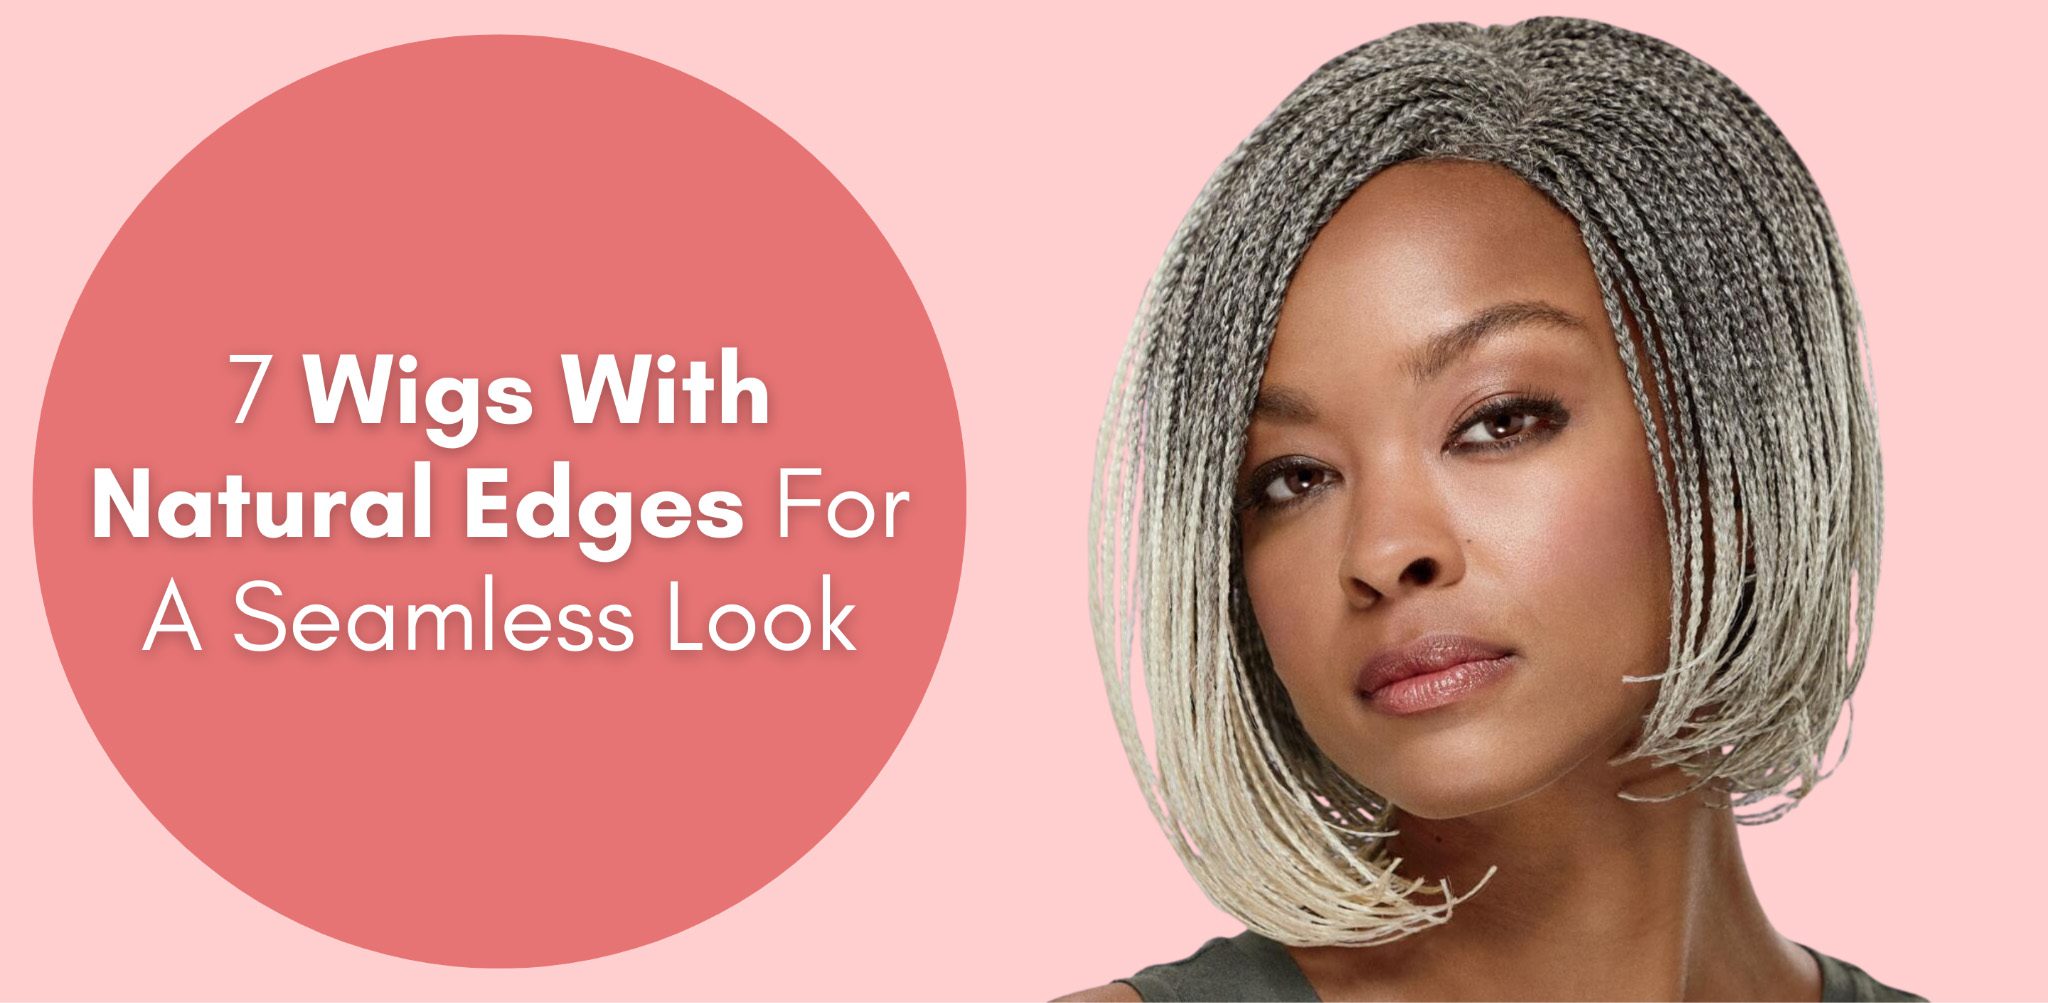 7 Wigs With Natural Edges For A Seamless Look